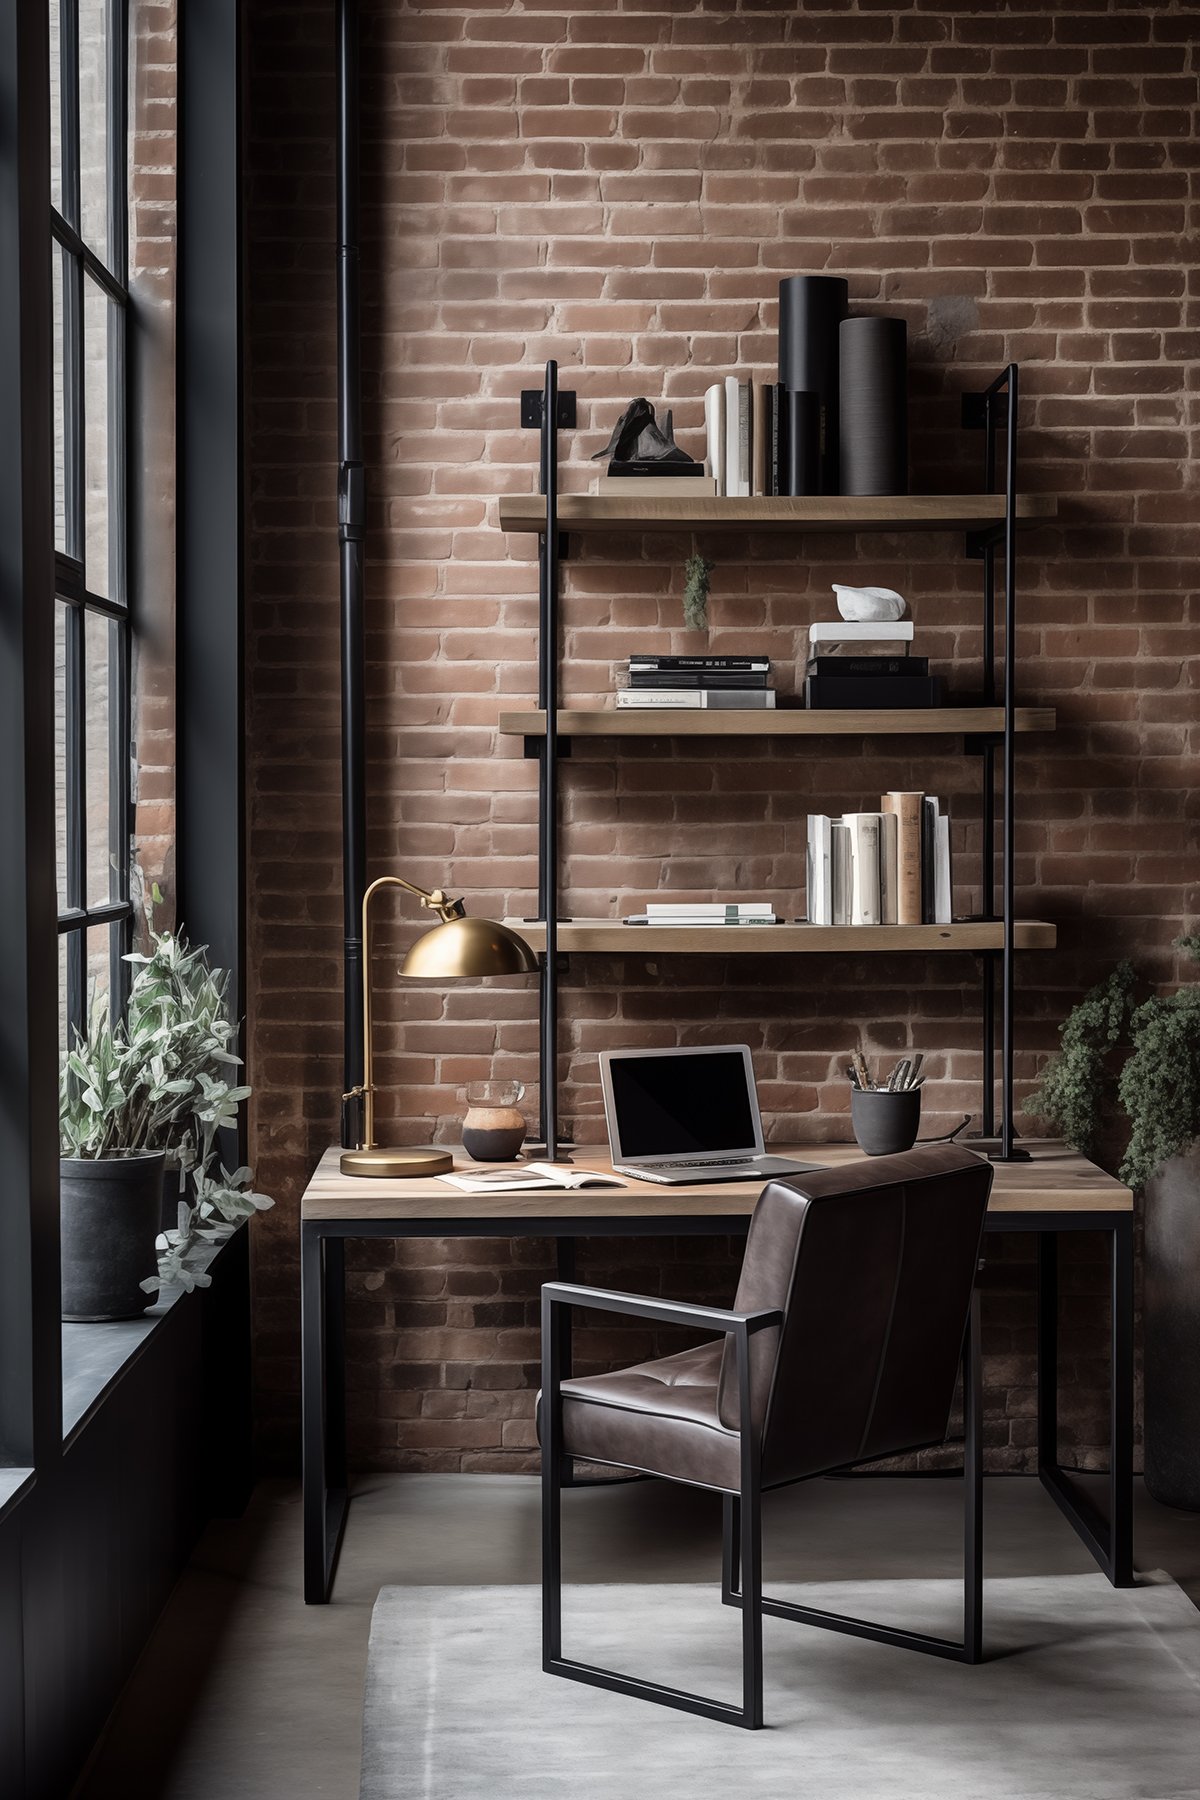 Industrial home office with brick wall, black shelving, leather chair, and gold lamp.